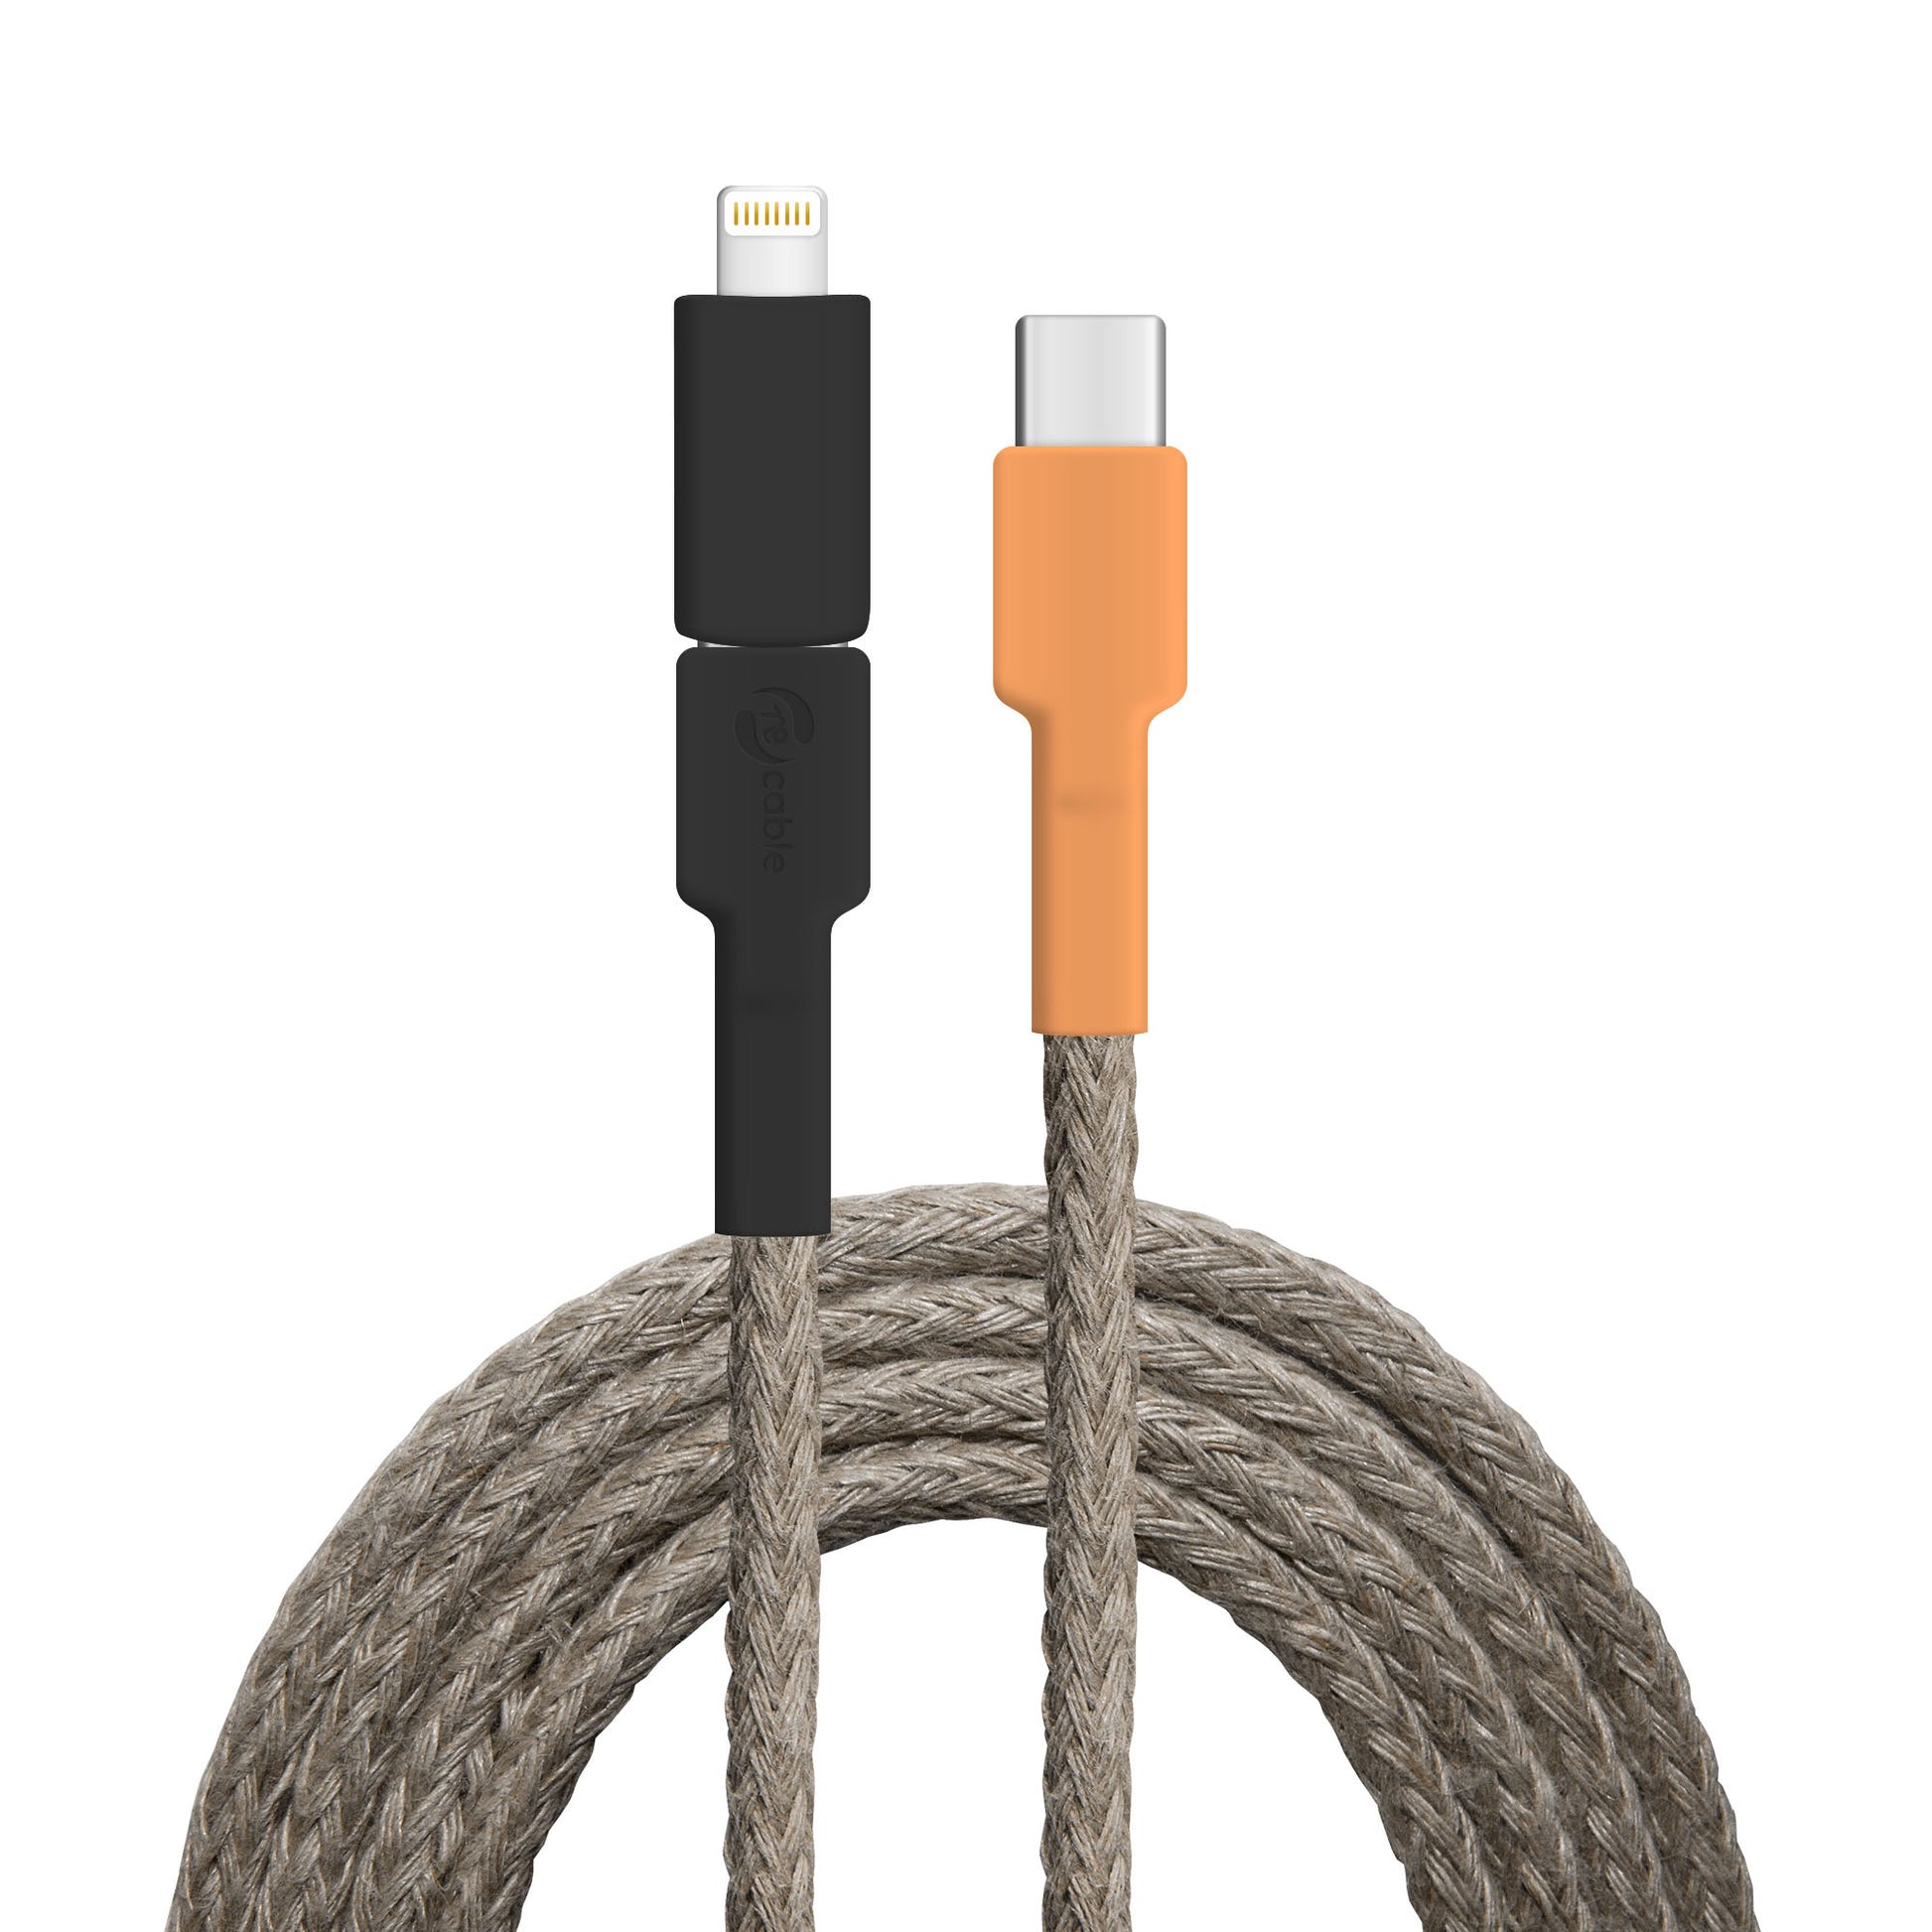 USB cable, Design: Watercock, Connectors: USB C to USB C with Lightning adapter (connected)